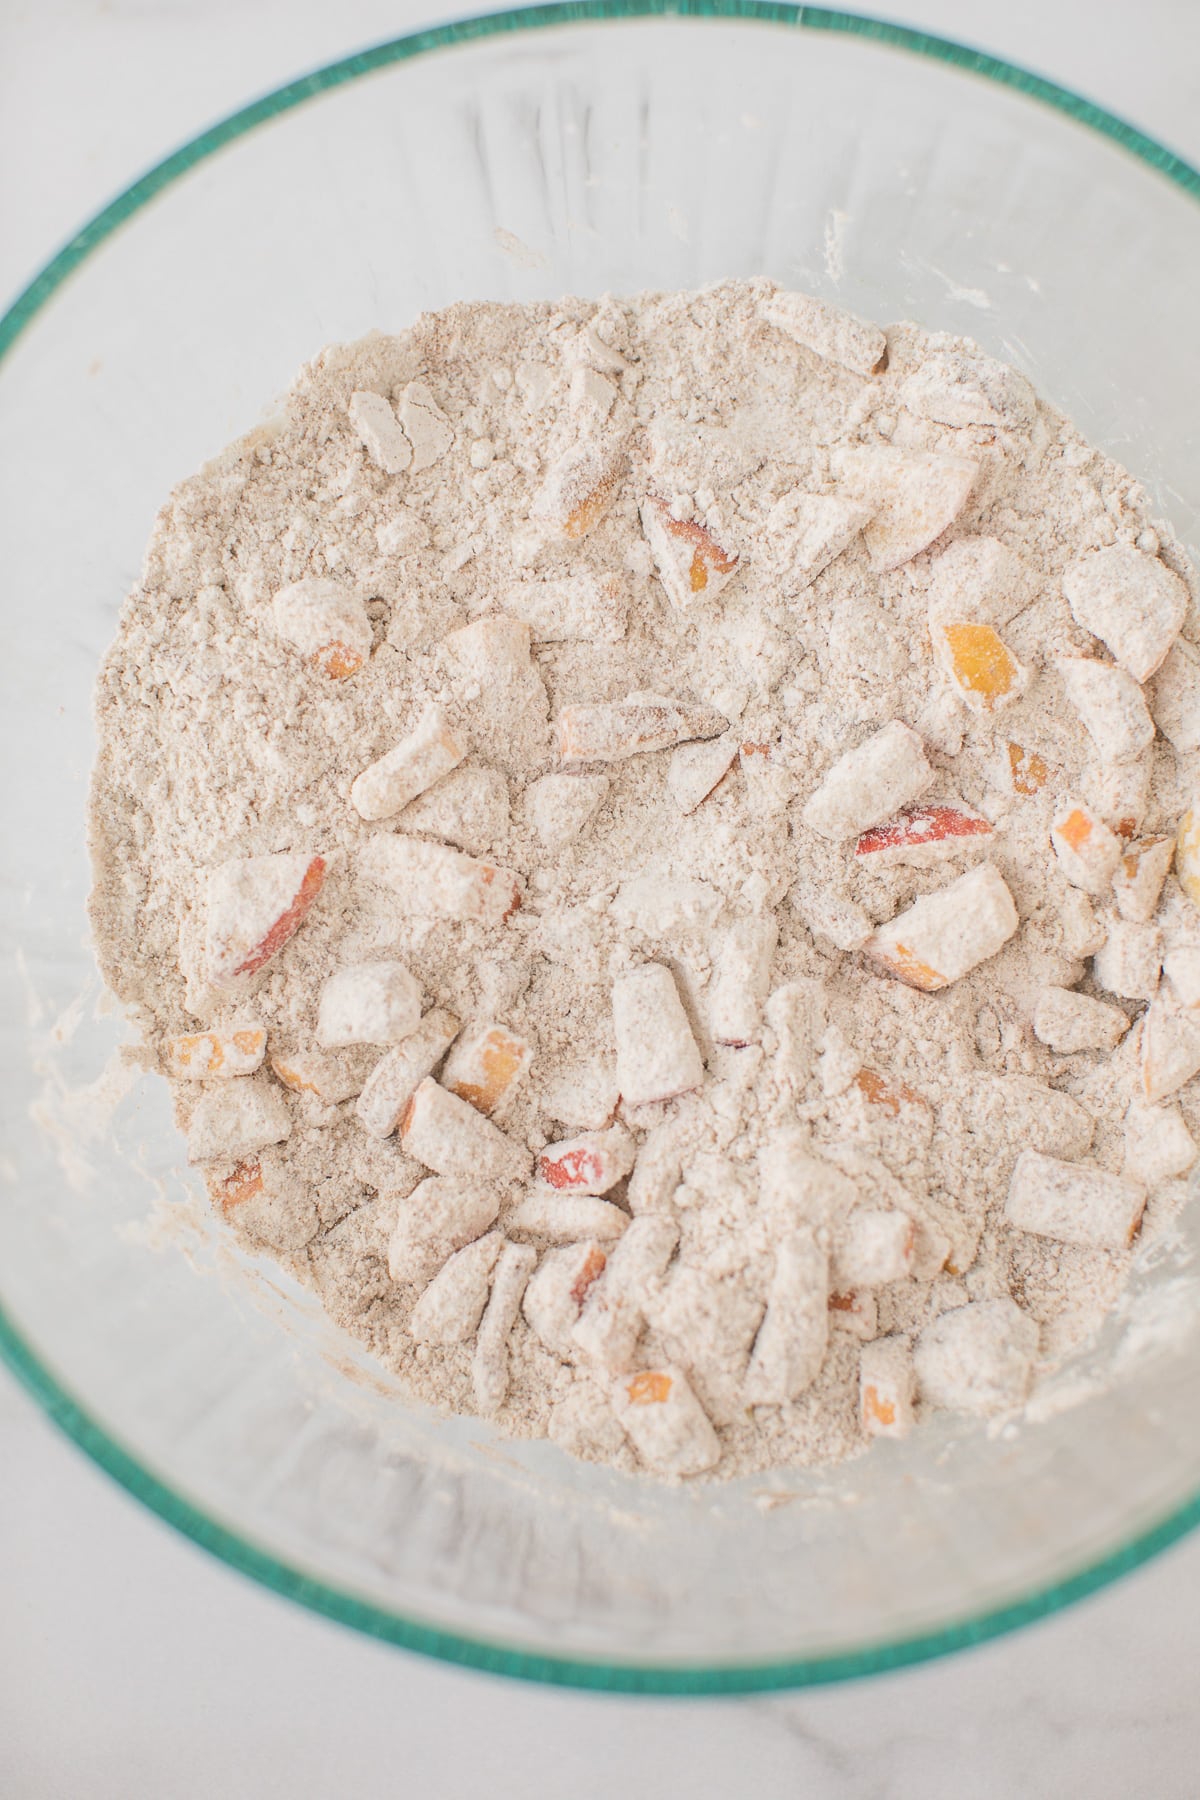 dry ingredients for muffins in a mixing bowl